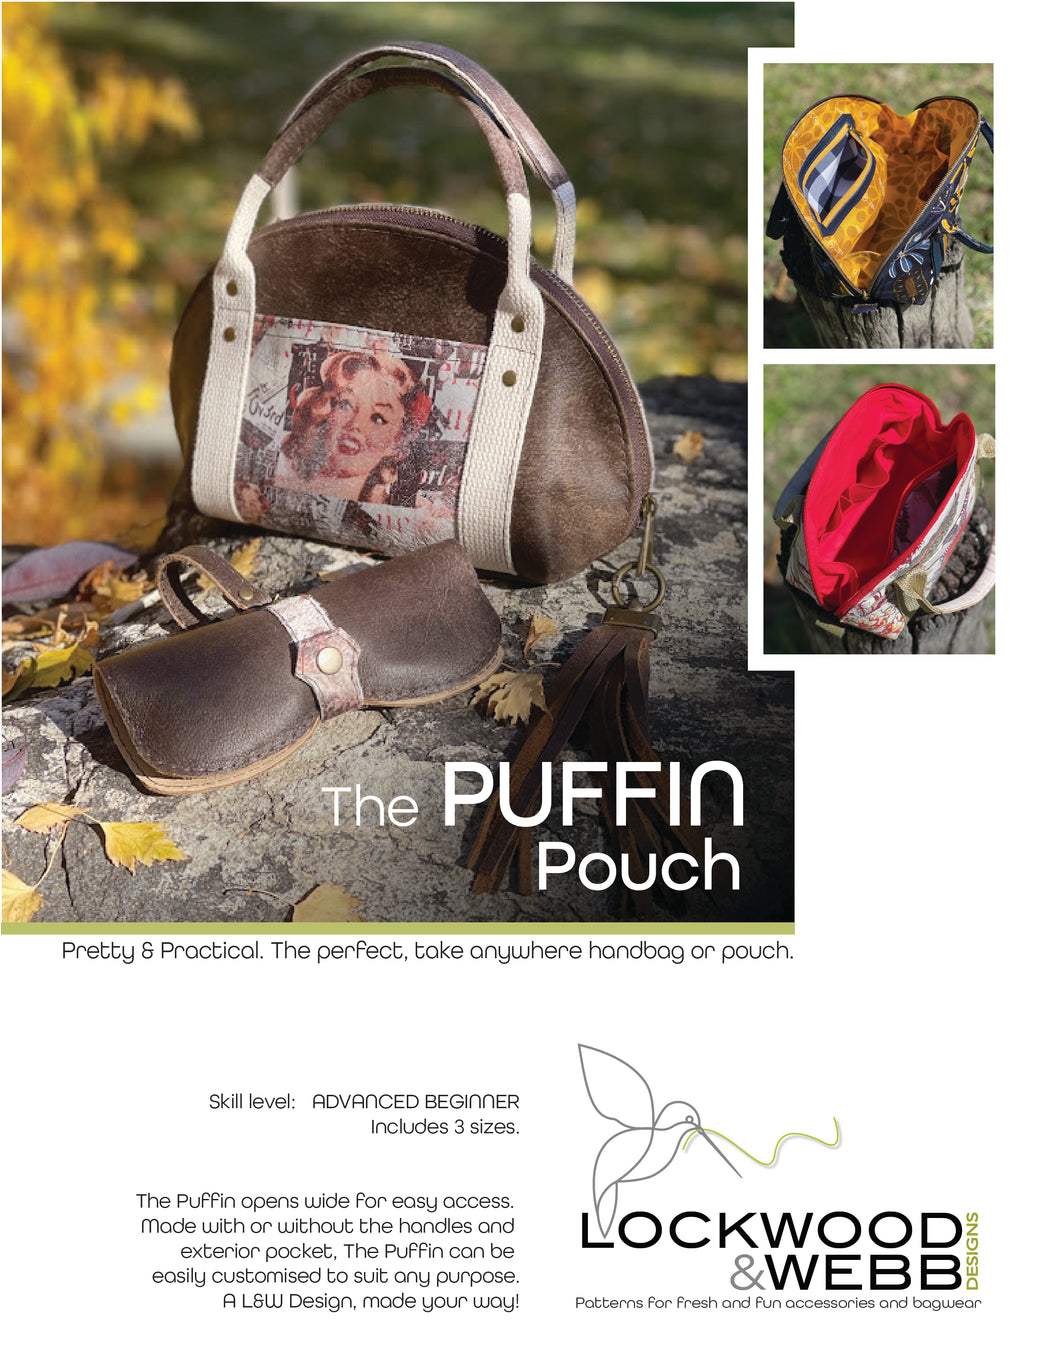 The PUFFIN Pouch